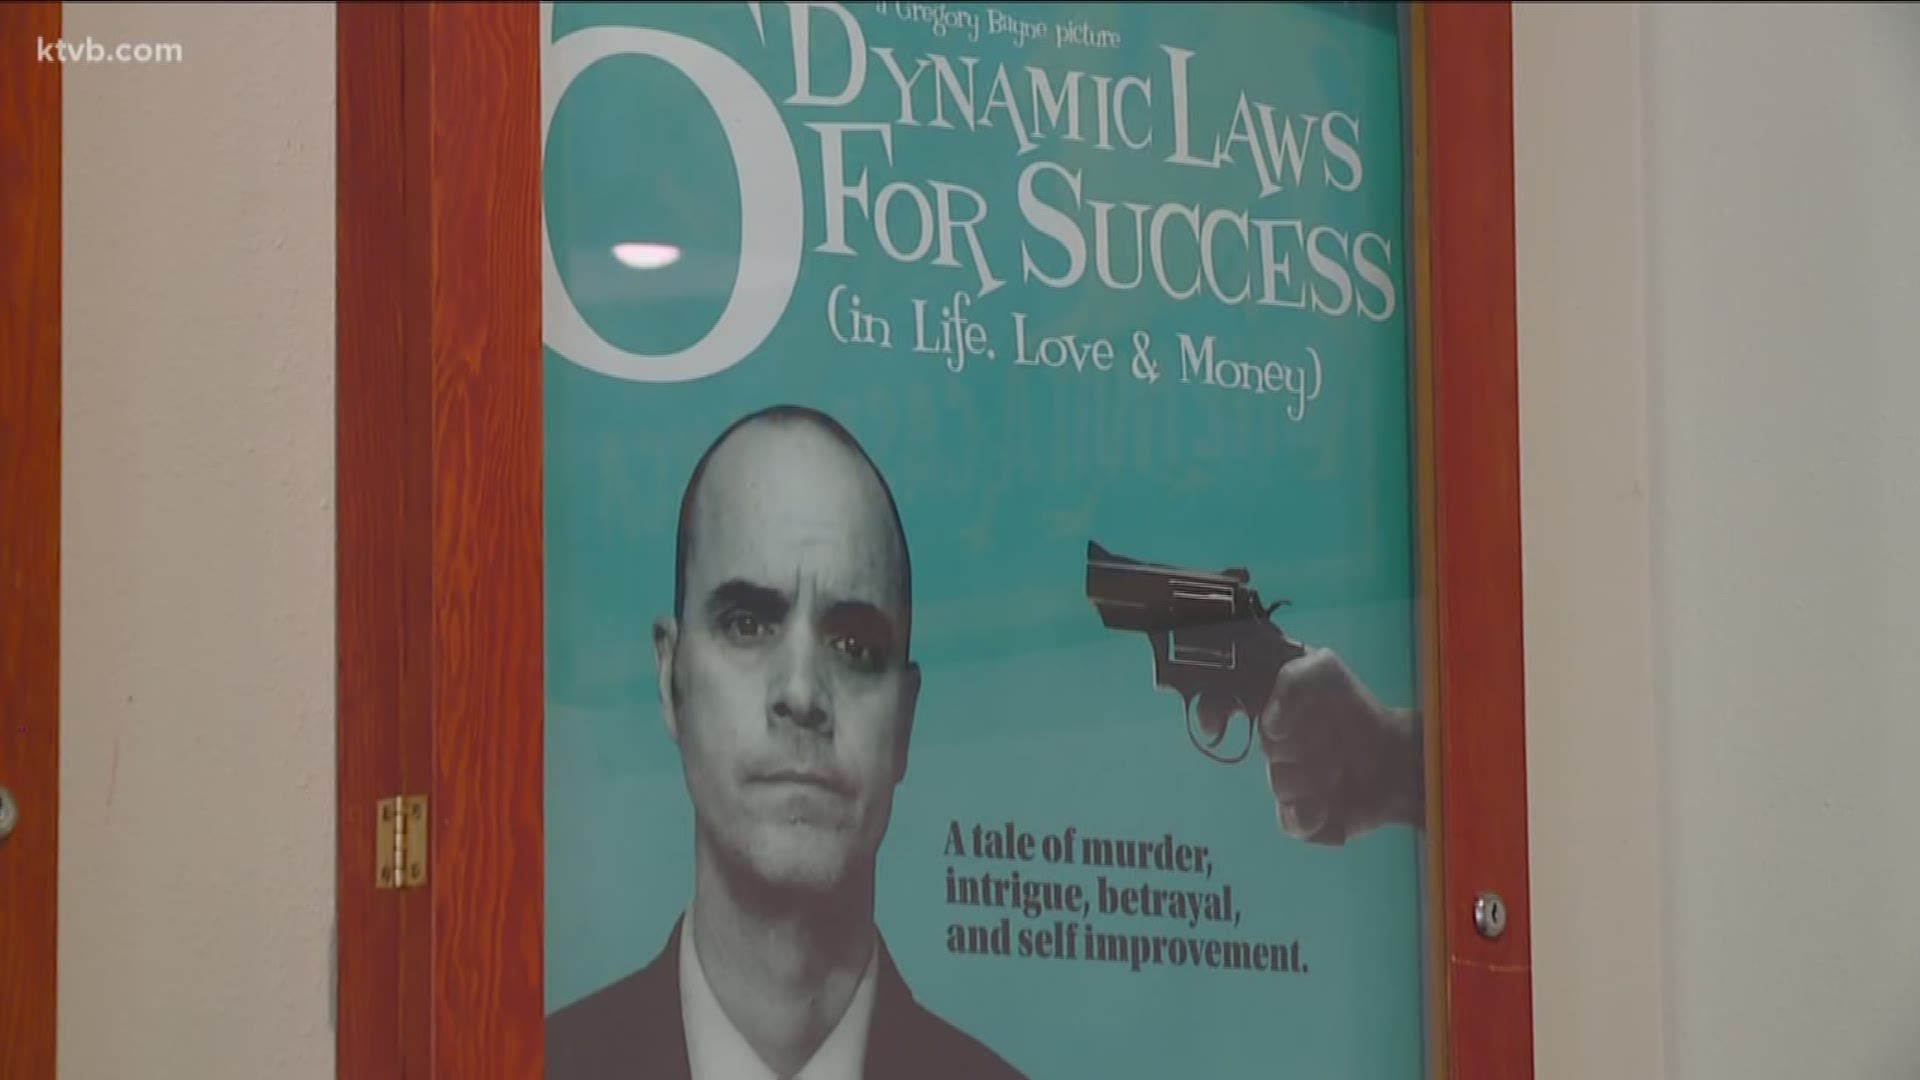 "6 Dynamic Laws for Success (in Life, Love & Money)" was shot in 2016 and was nominated for several awards, winning a handful of them, at film festivals all over the hemisphere in the last year. Its success speaks to the caliber of talent in the Gem State